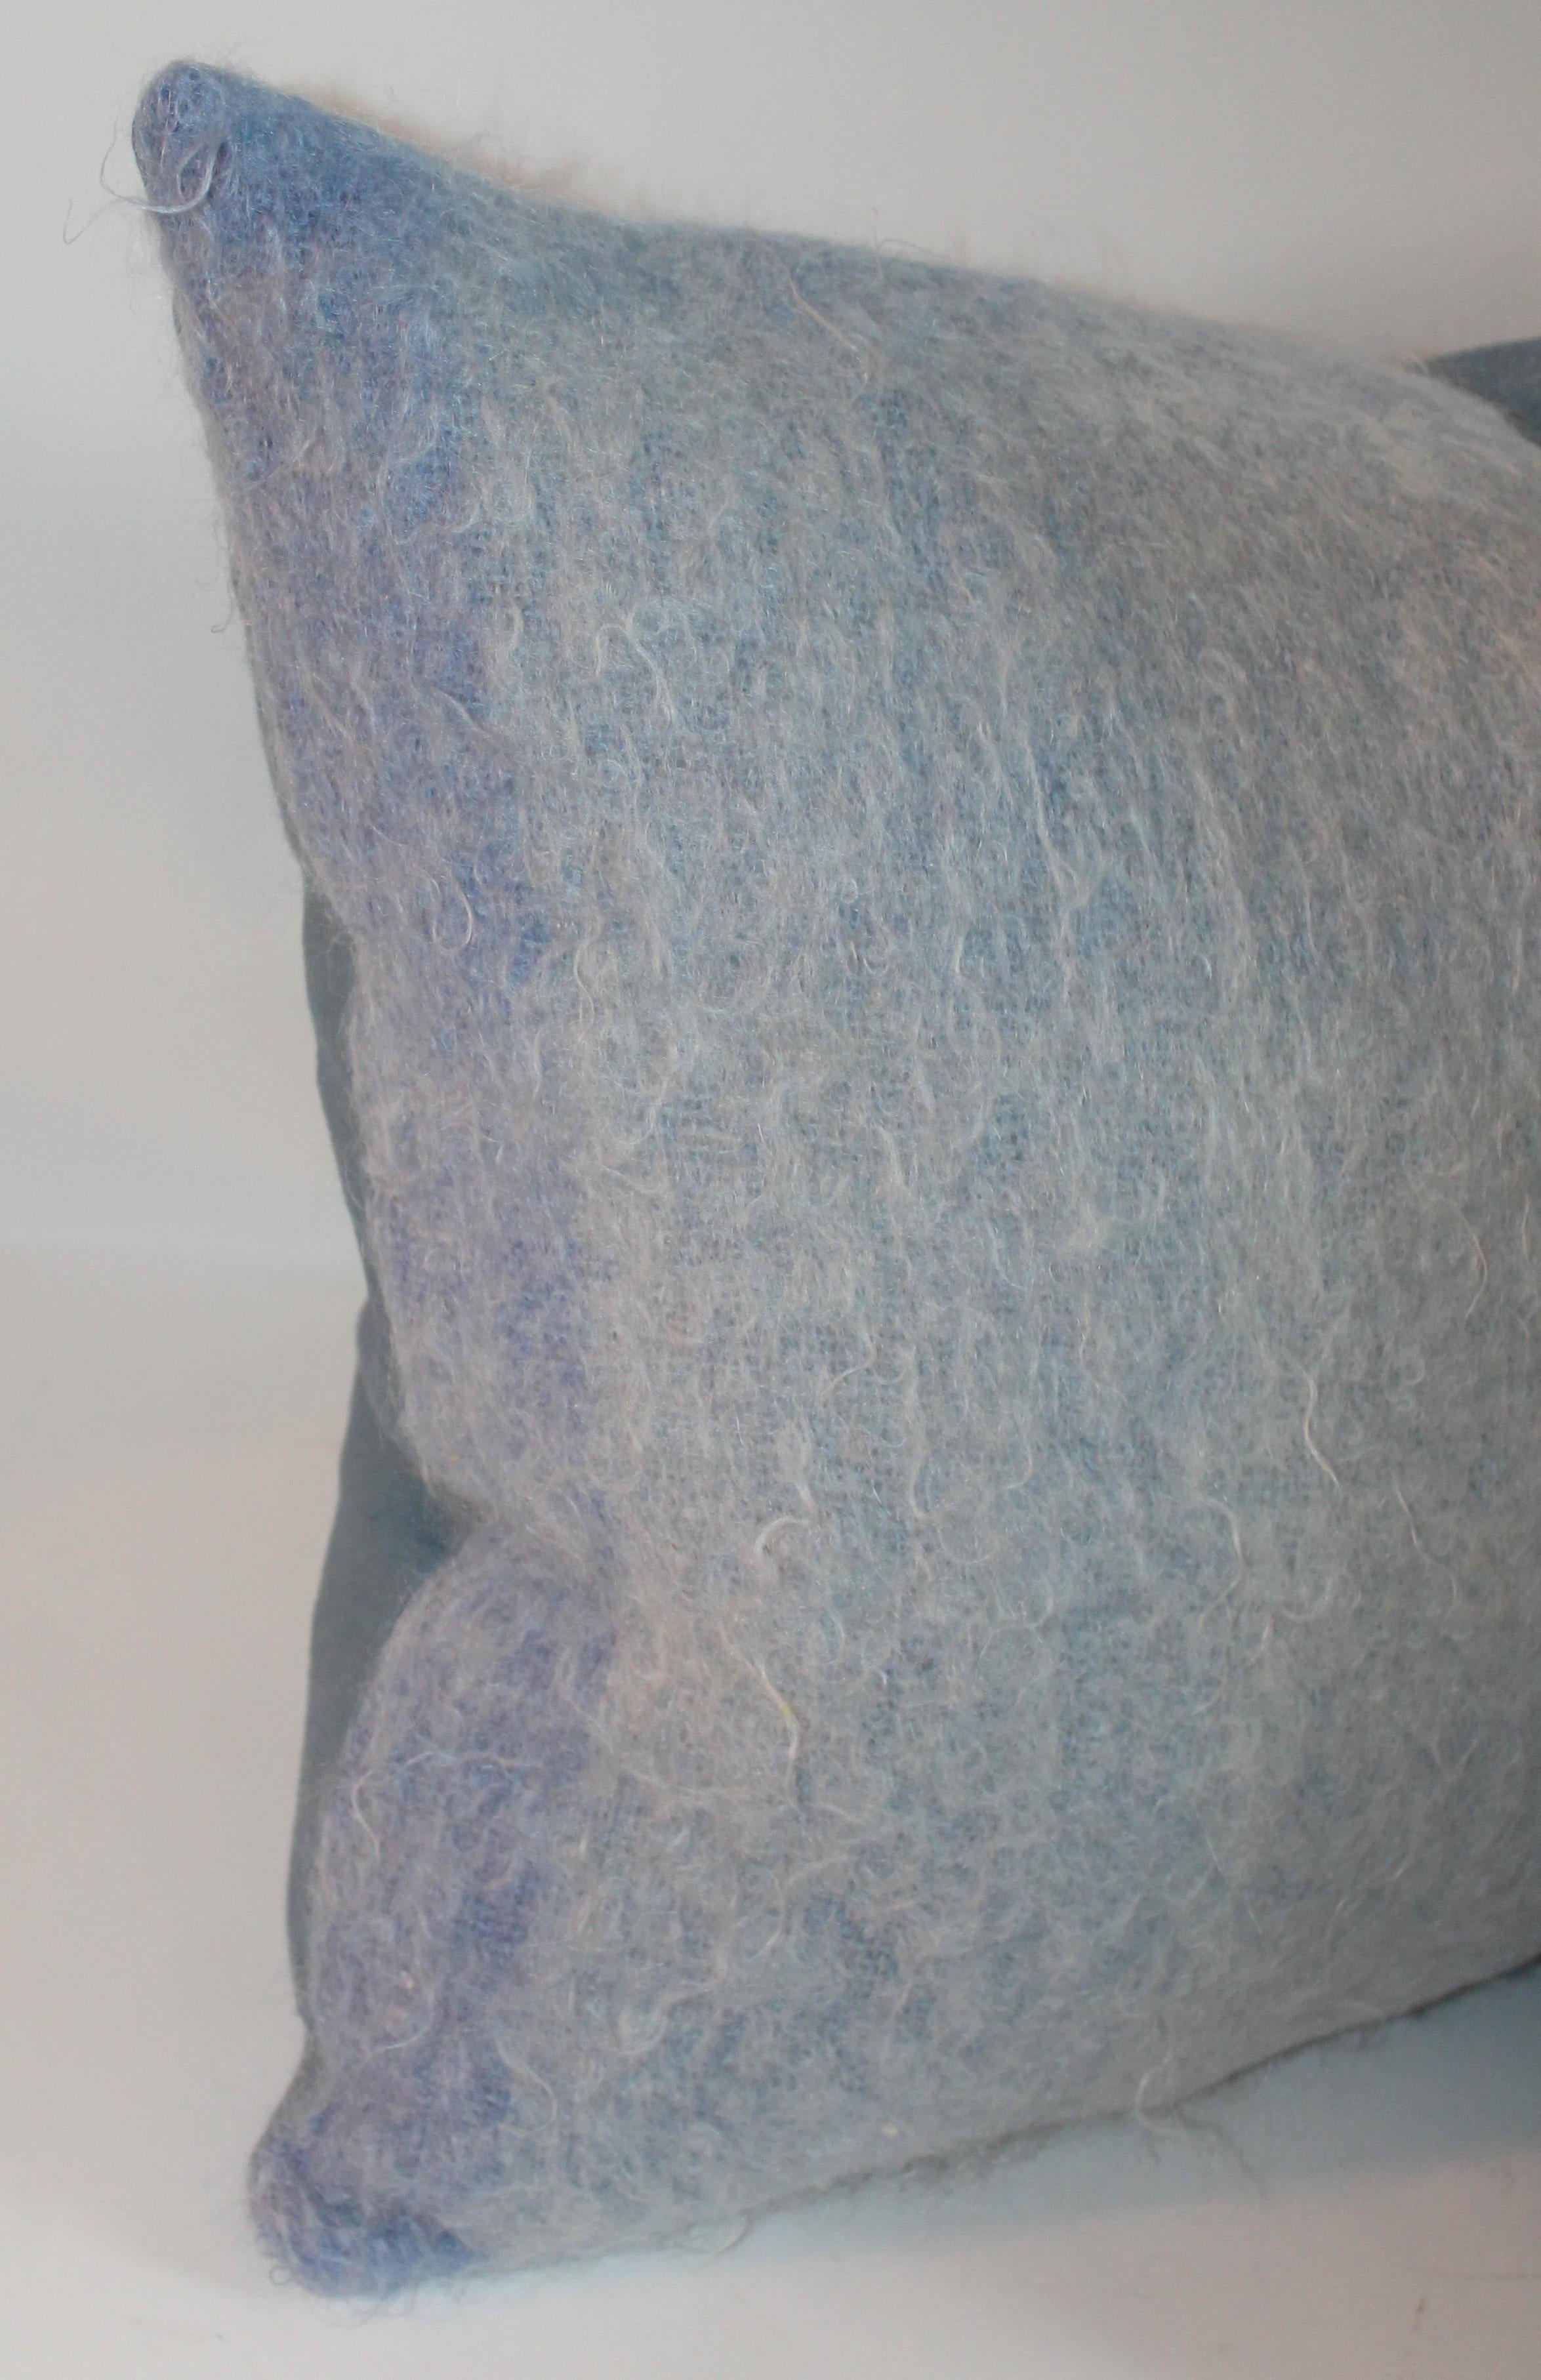 Mohair Pillows in Blues from Vintage Blanket, Pair 2